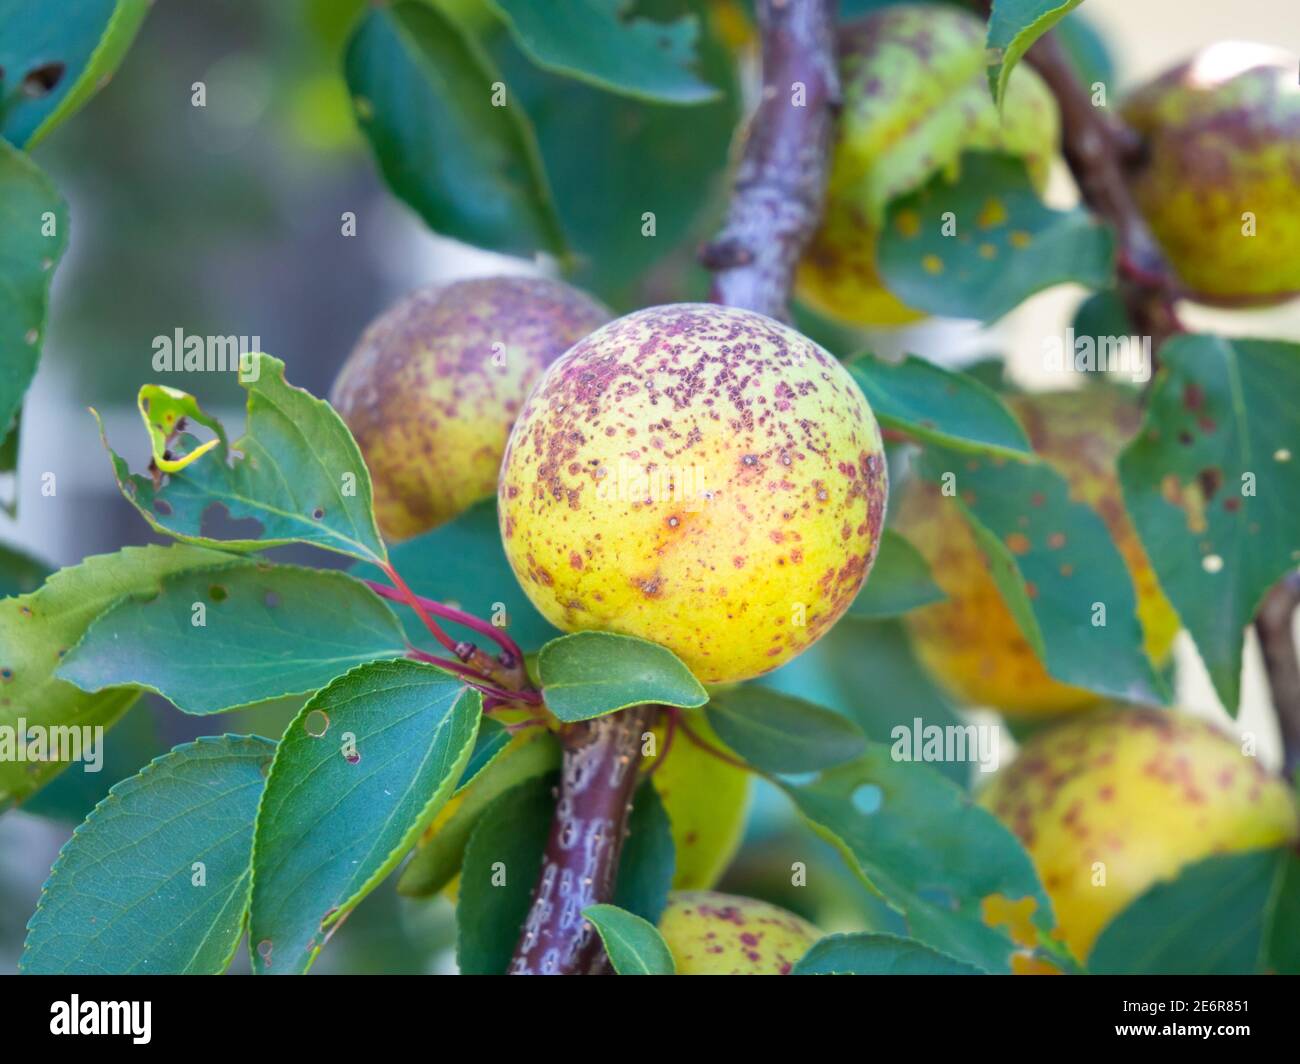 Apricot tree affected by perforated spot and rot Stock Photo